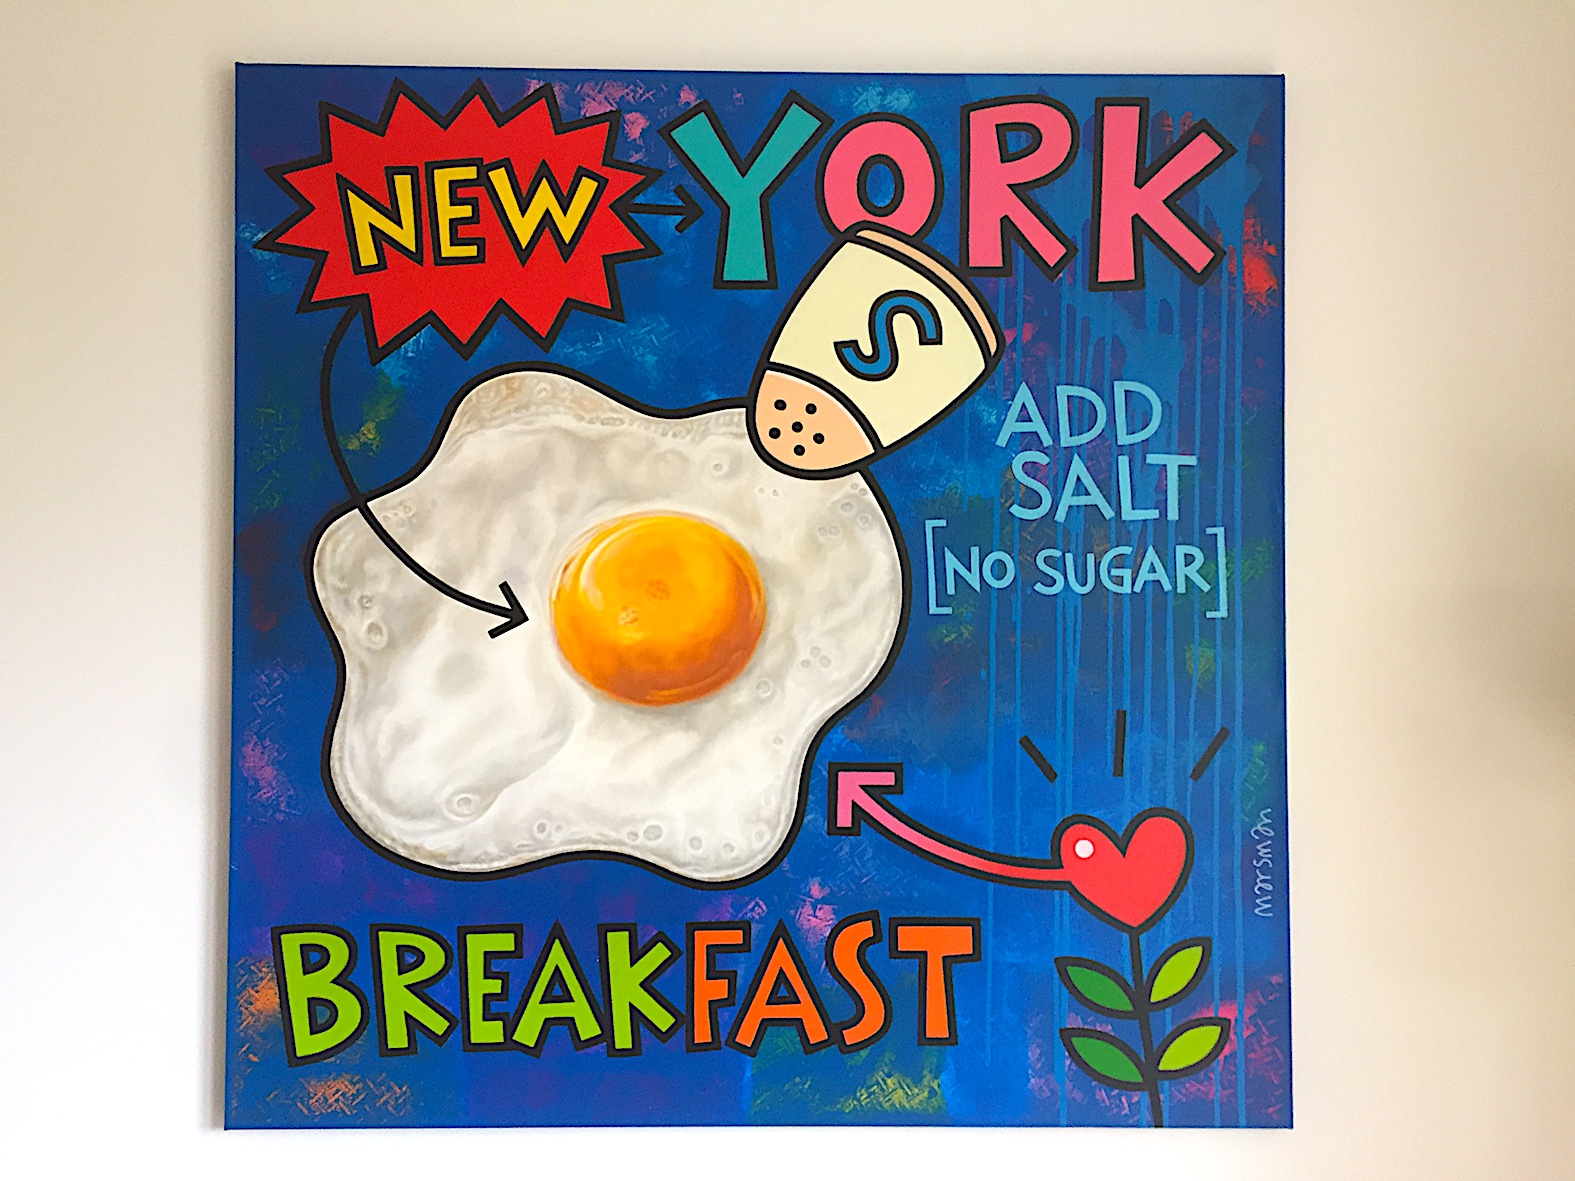 <b>NEW YORK BREAKFAST</b> - 110 x 110 cm - acrylic and oilpaint on canvas - SOLD  <a style="color: red; text-decoration: none" href="mailto:jpgpmarsman@onsbrabantnet.nl">BESTEL</a>